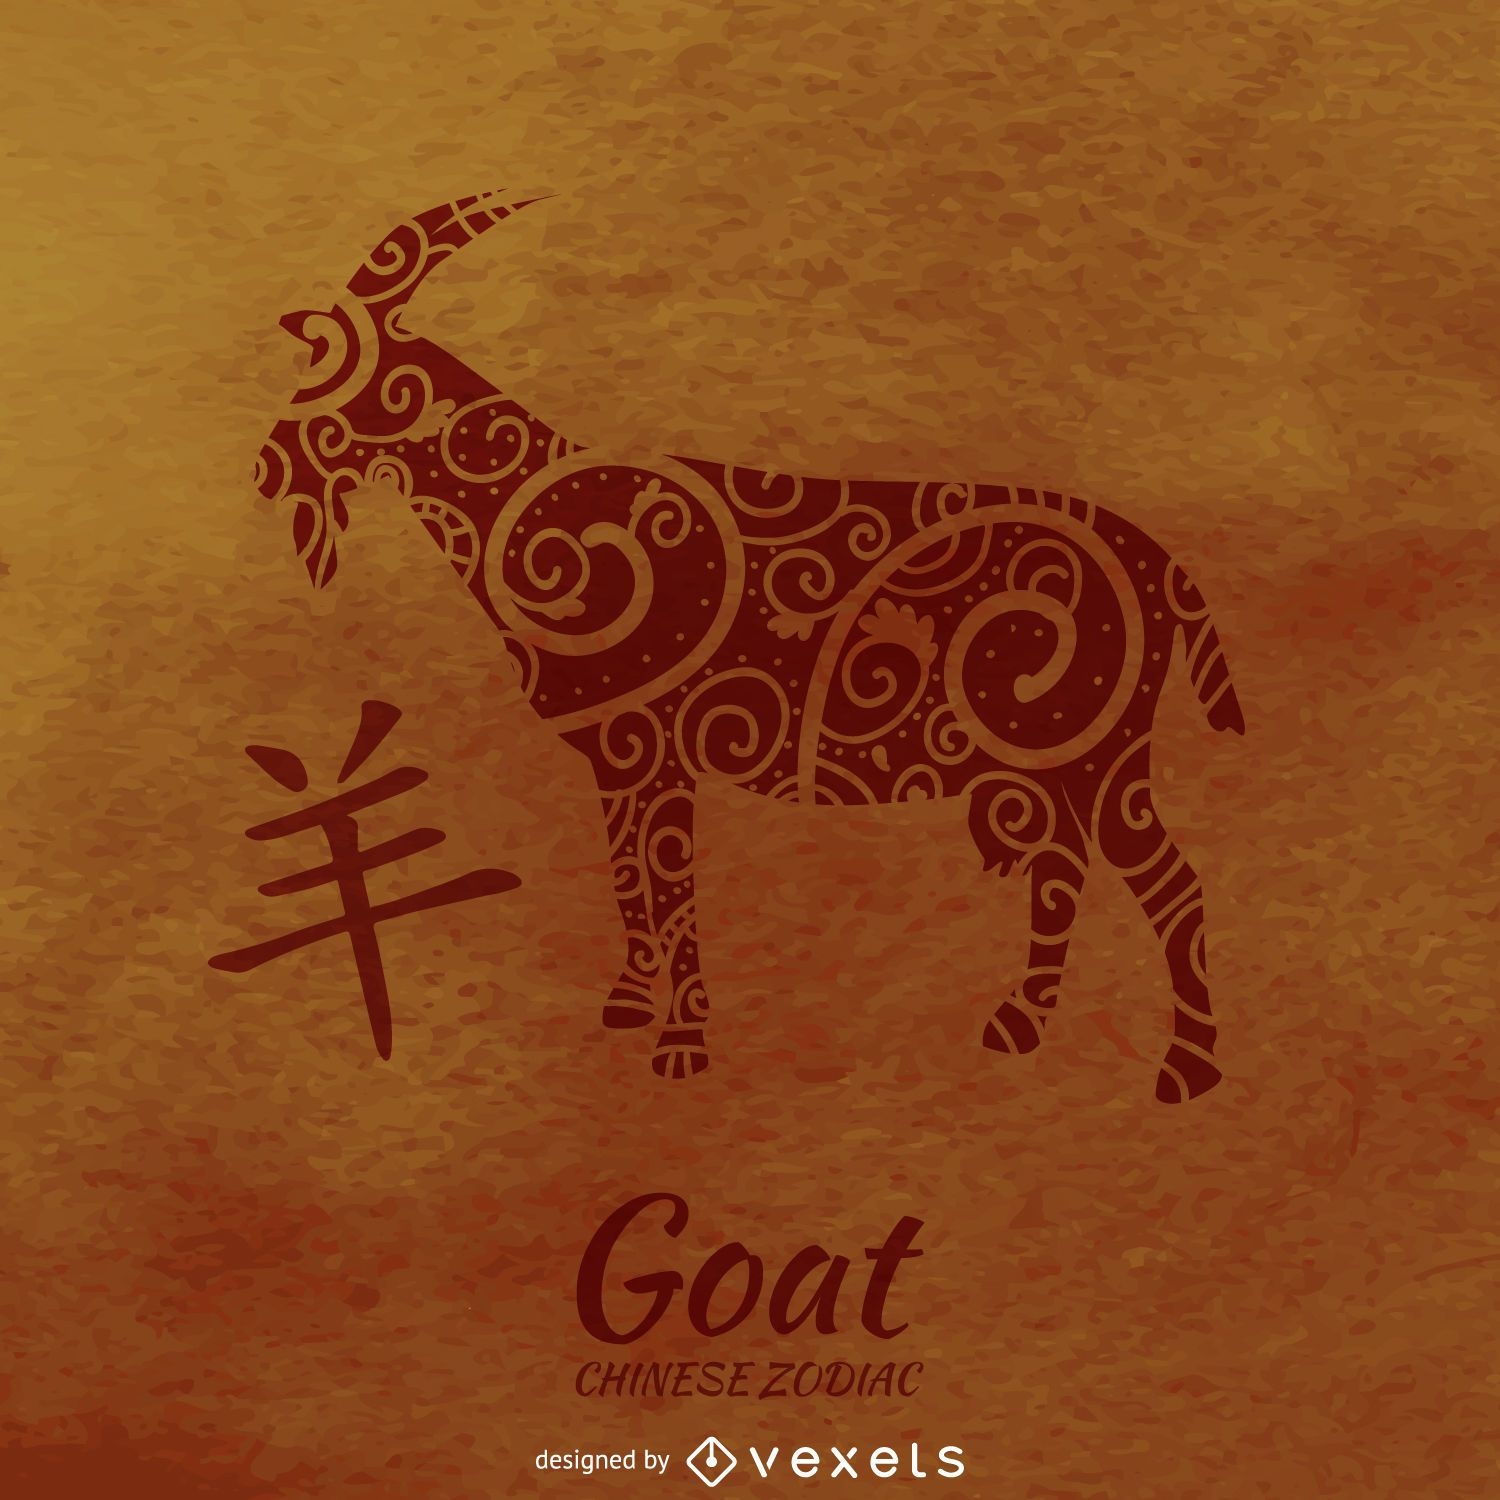 CHINESE ZODIAC GOAT PICTURES PICS IMAGES AND PHOTOS FOR INSPIRATION